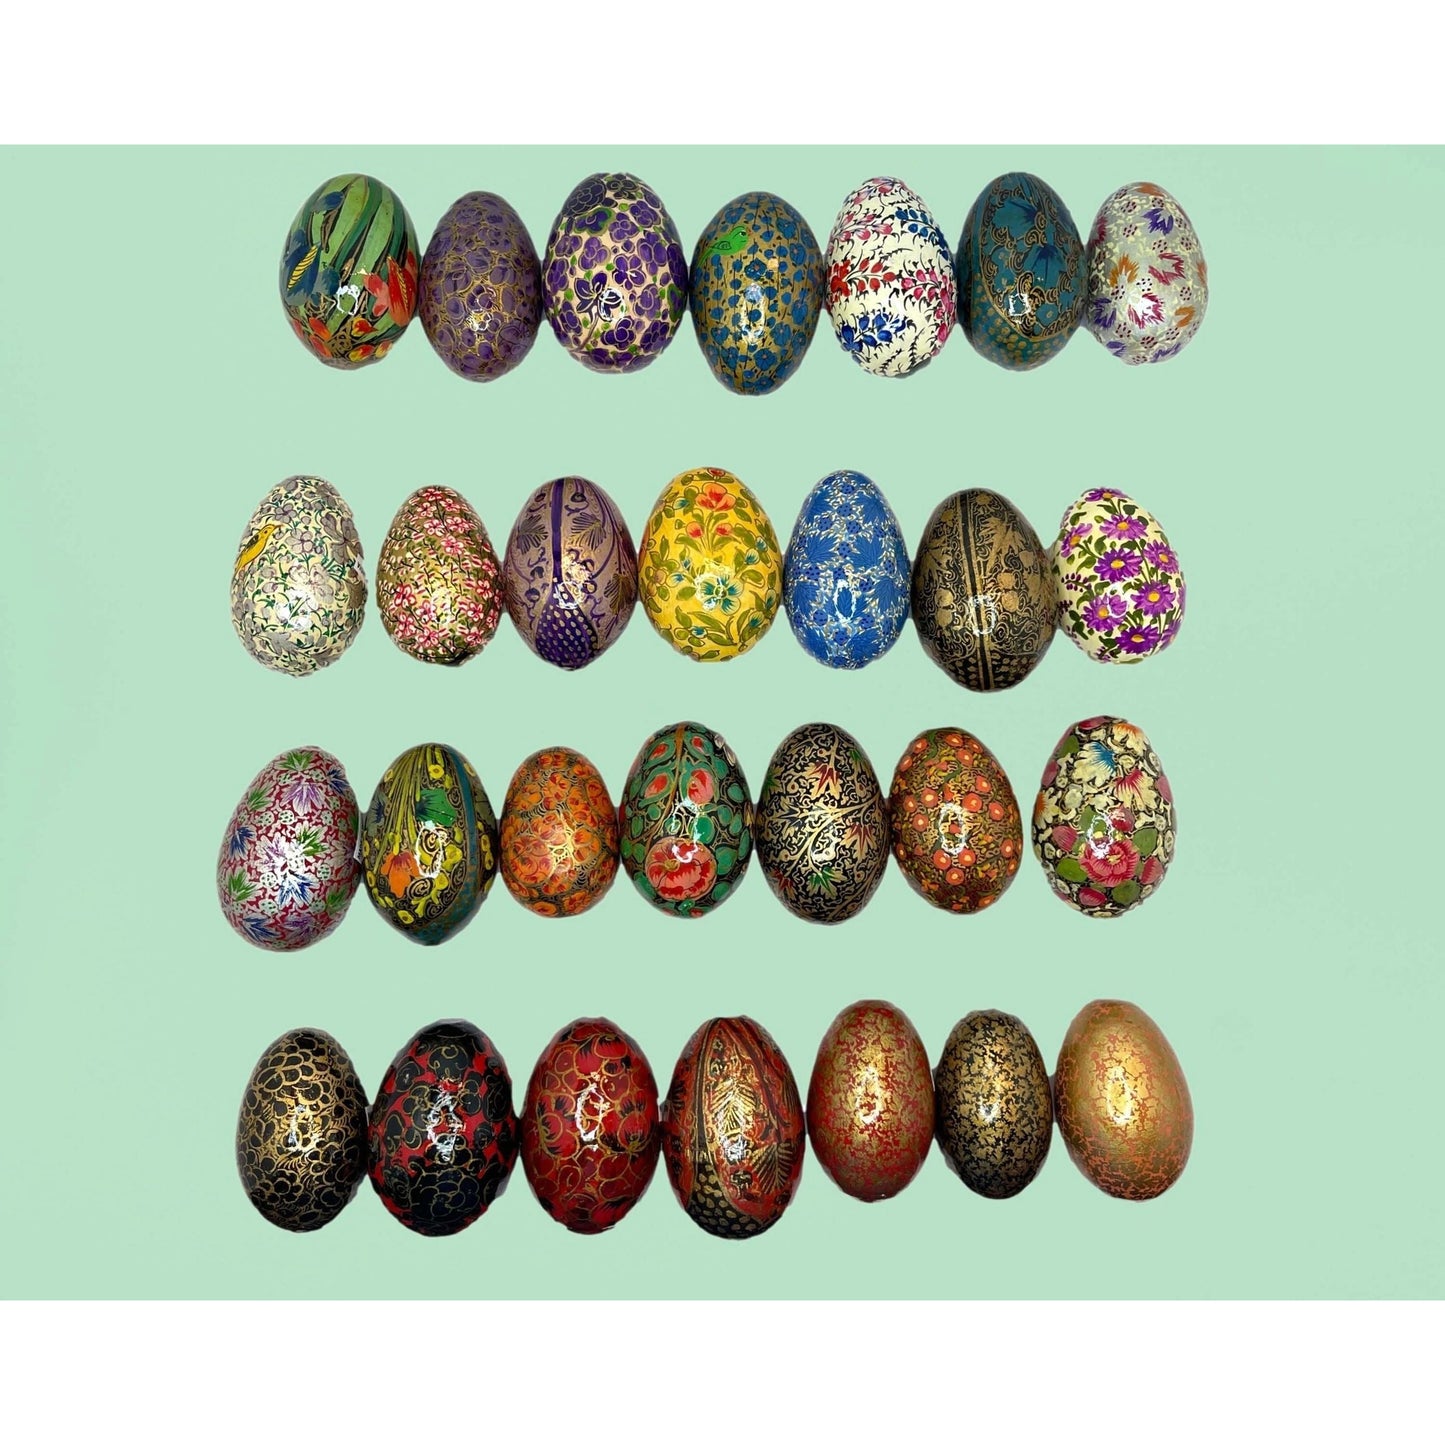 Handmade and Painted Paper Mache' Eggs